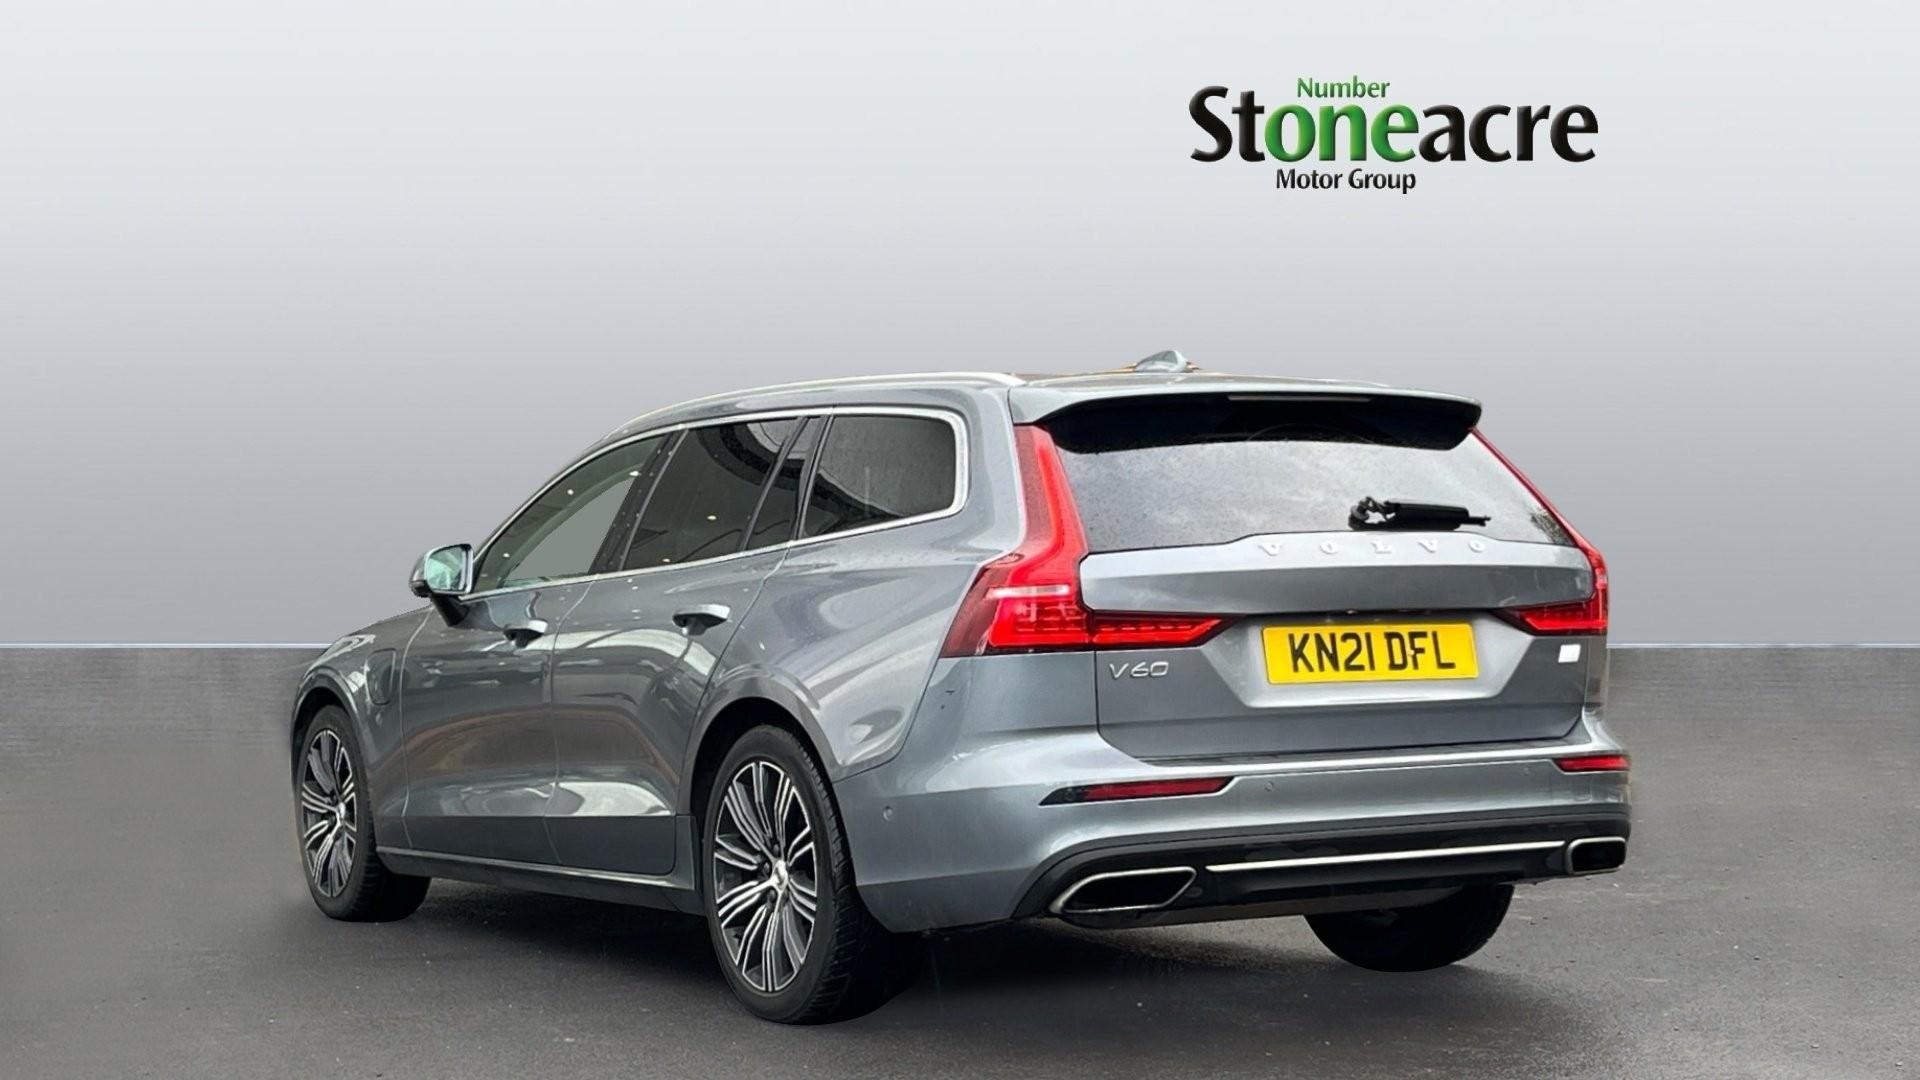 Volvo V60 2.0h T6 Recharge 11.6kWh Inscription Auto AWD Euro 6 (s/s) 5dr (KN21DFL) image 1